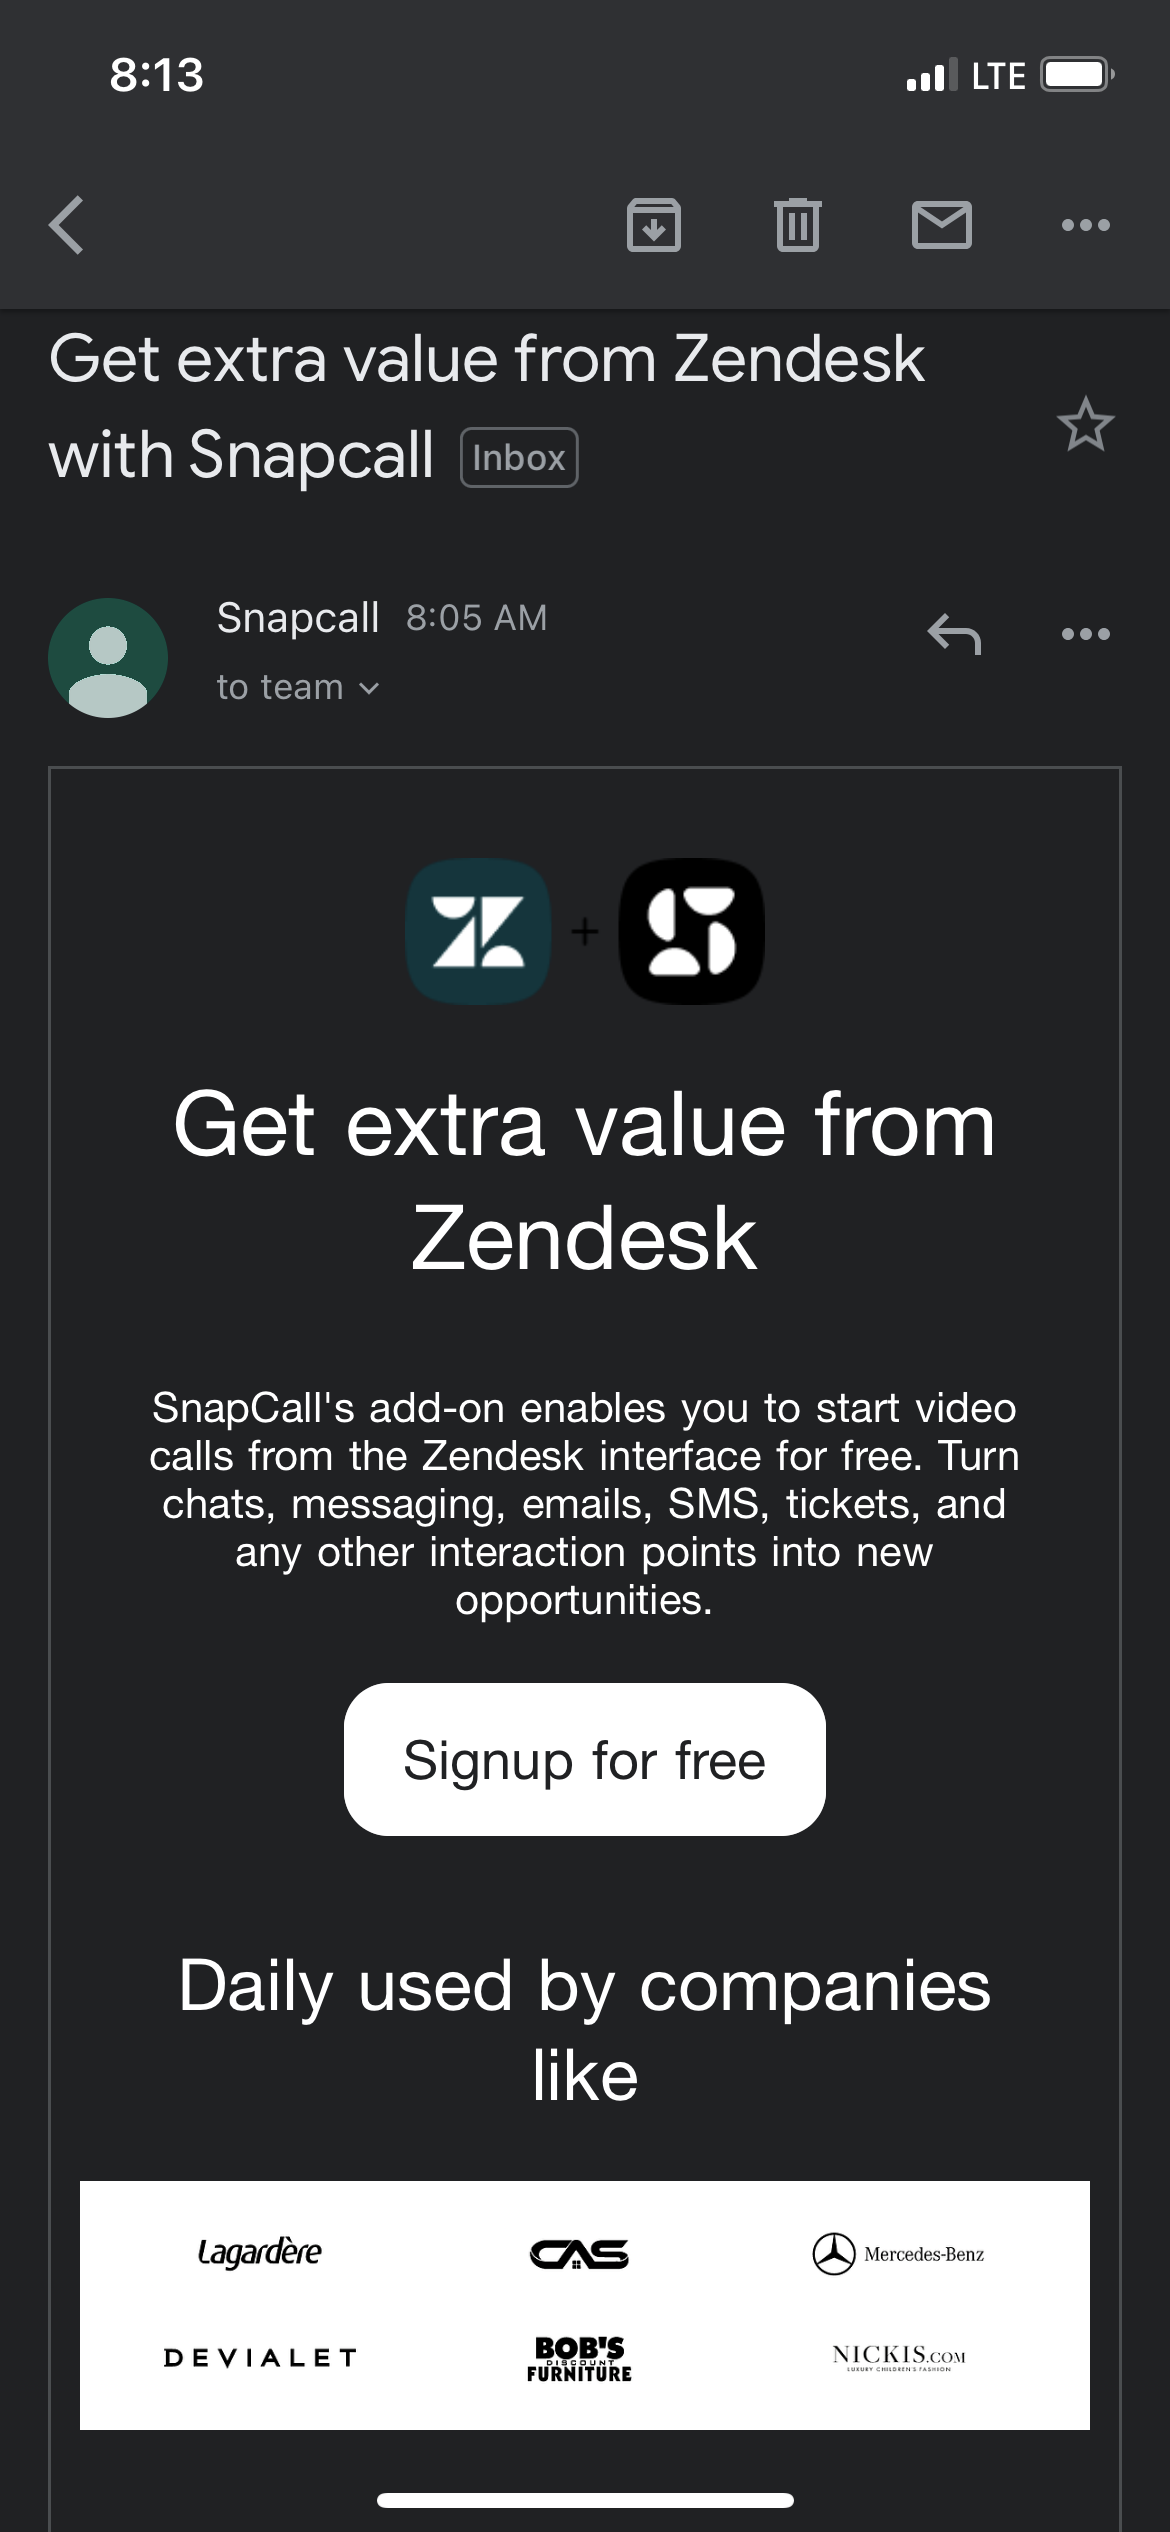 Screenshot of email from snapcall focused on Zendesk